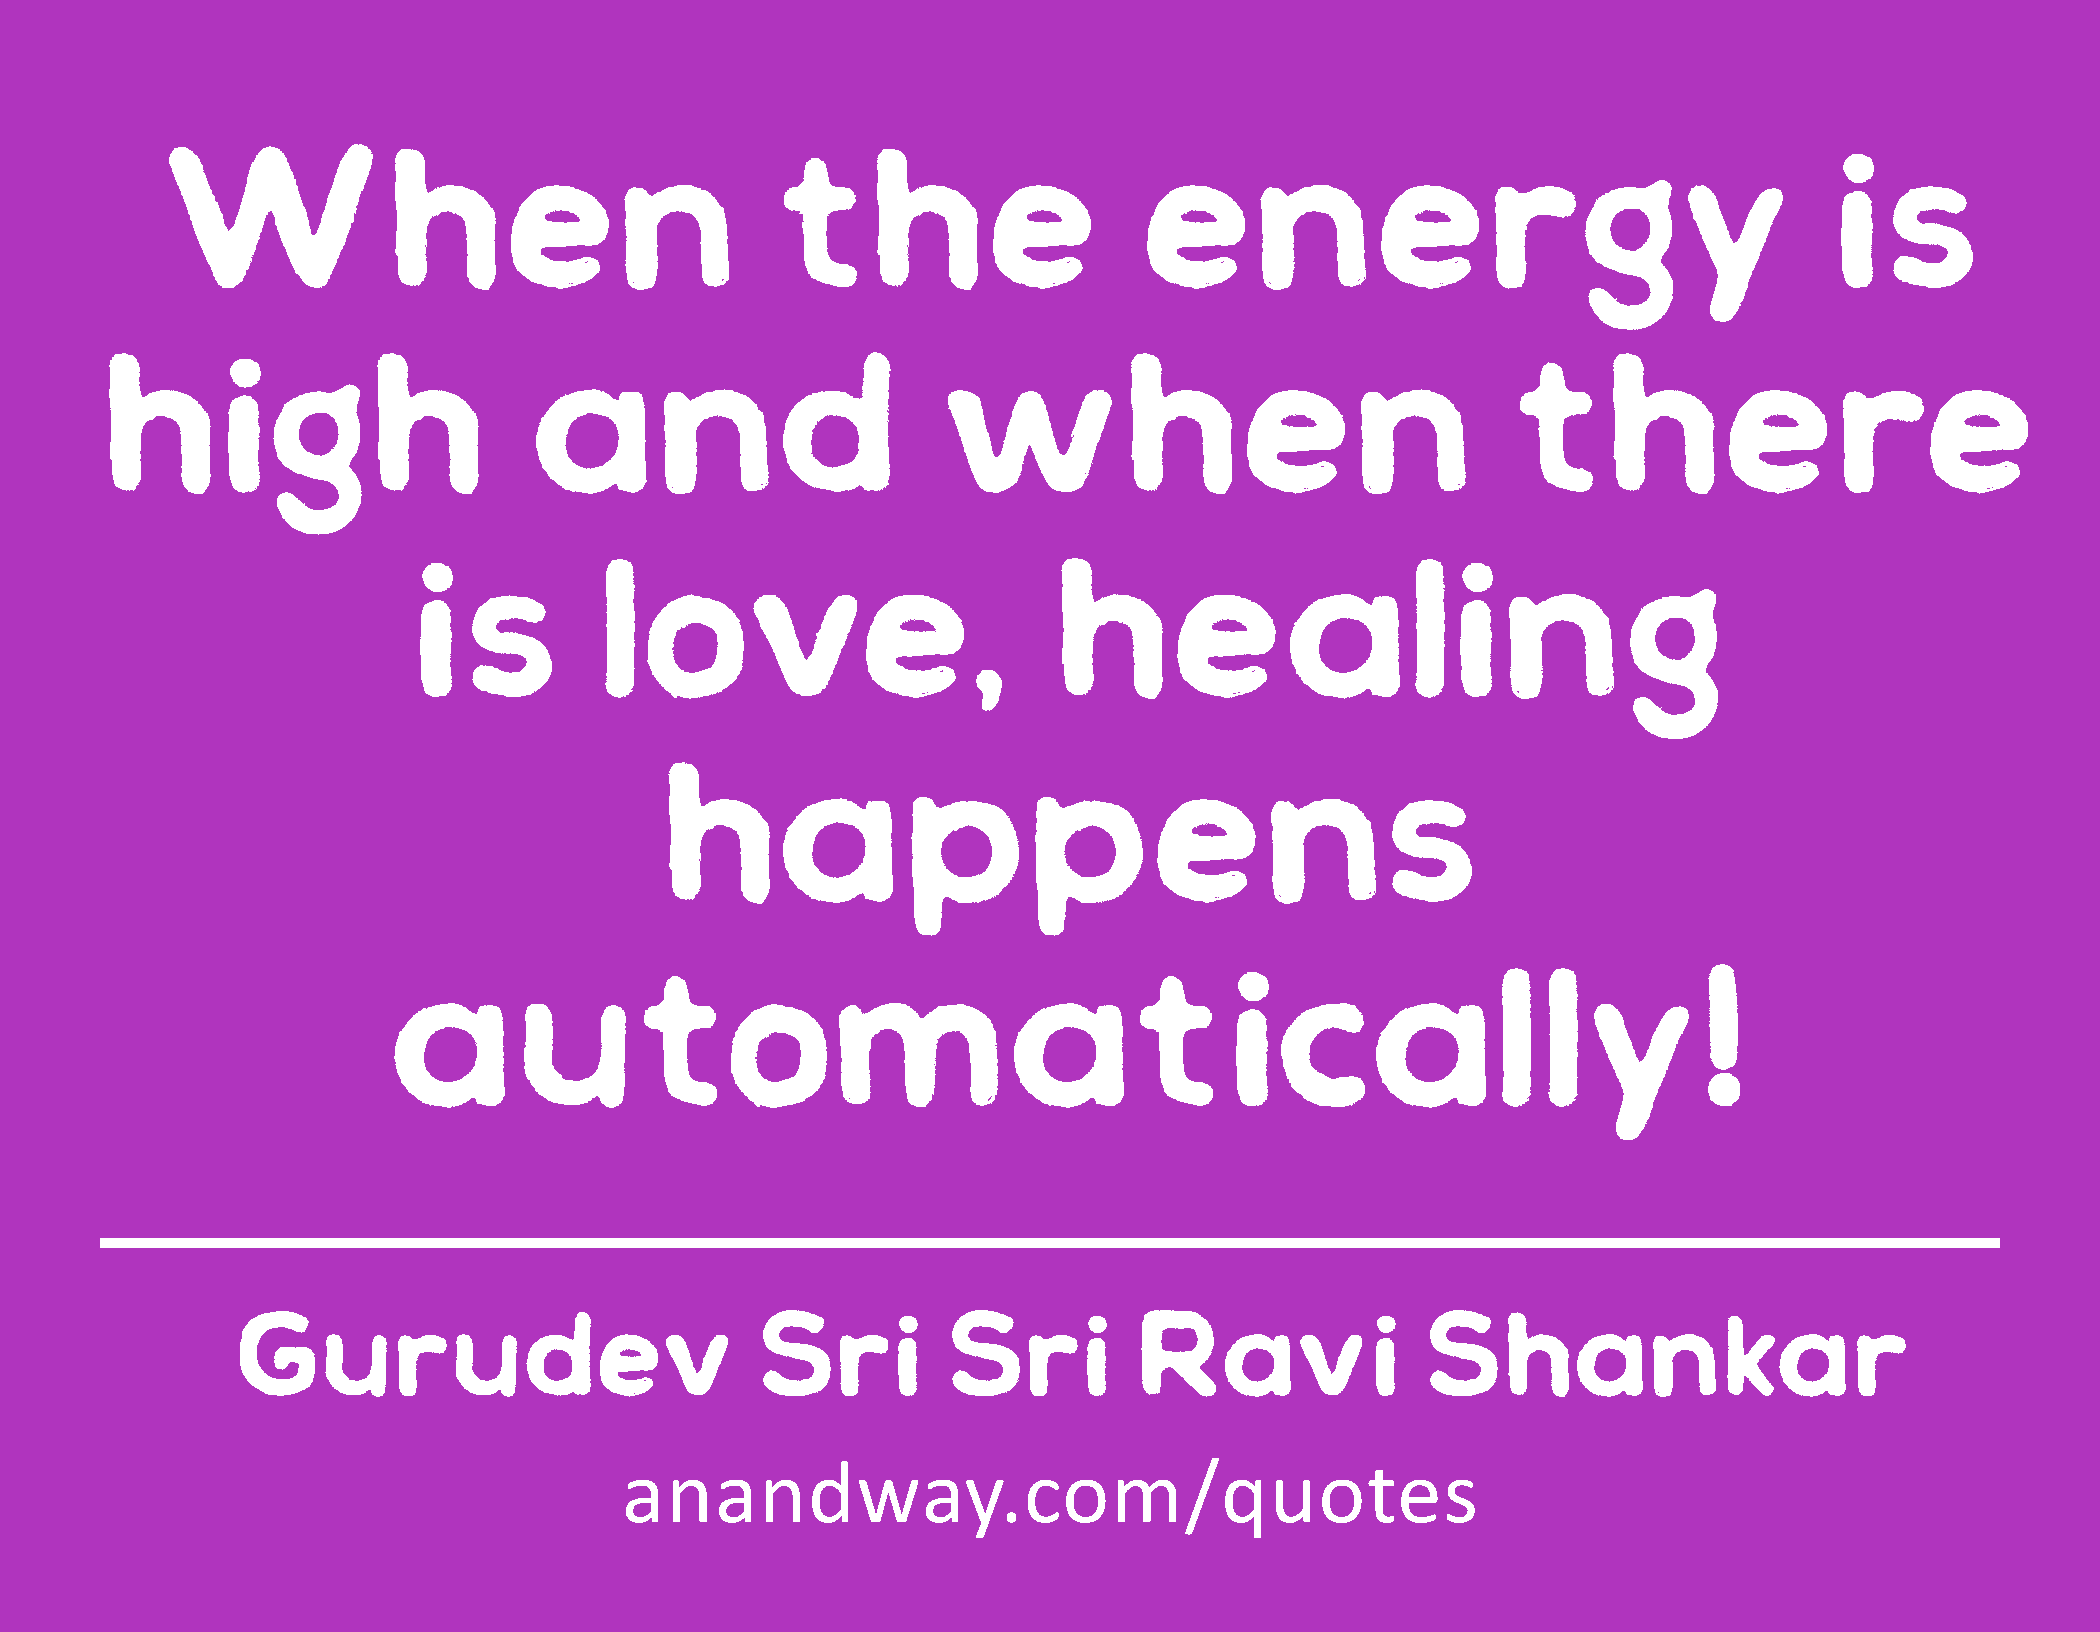 When the energy is high and when there is love, healing happens automatically! 
 -Gurudev Sri Sri Ravi Shankar